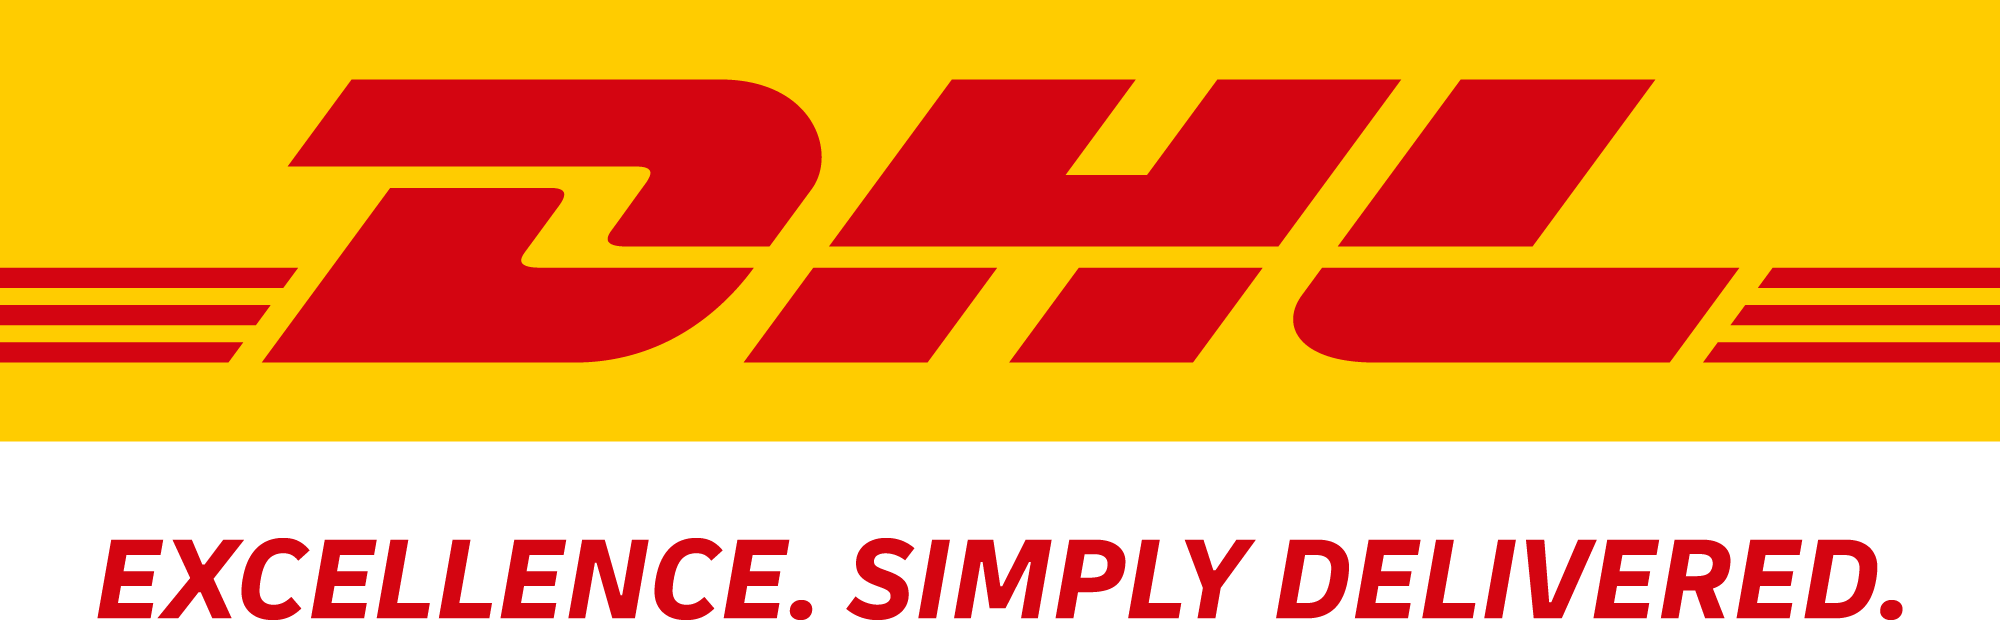 DHL shipping within the EU, to Switzerland and the UK